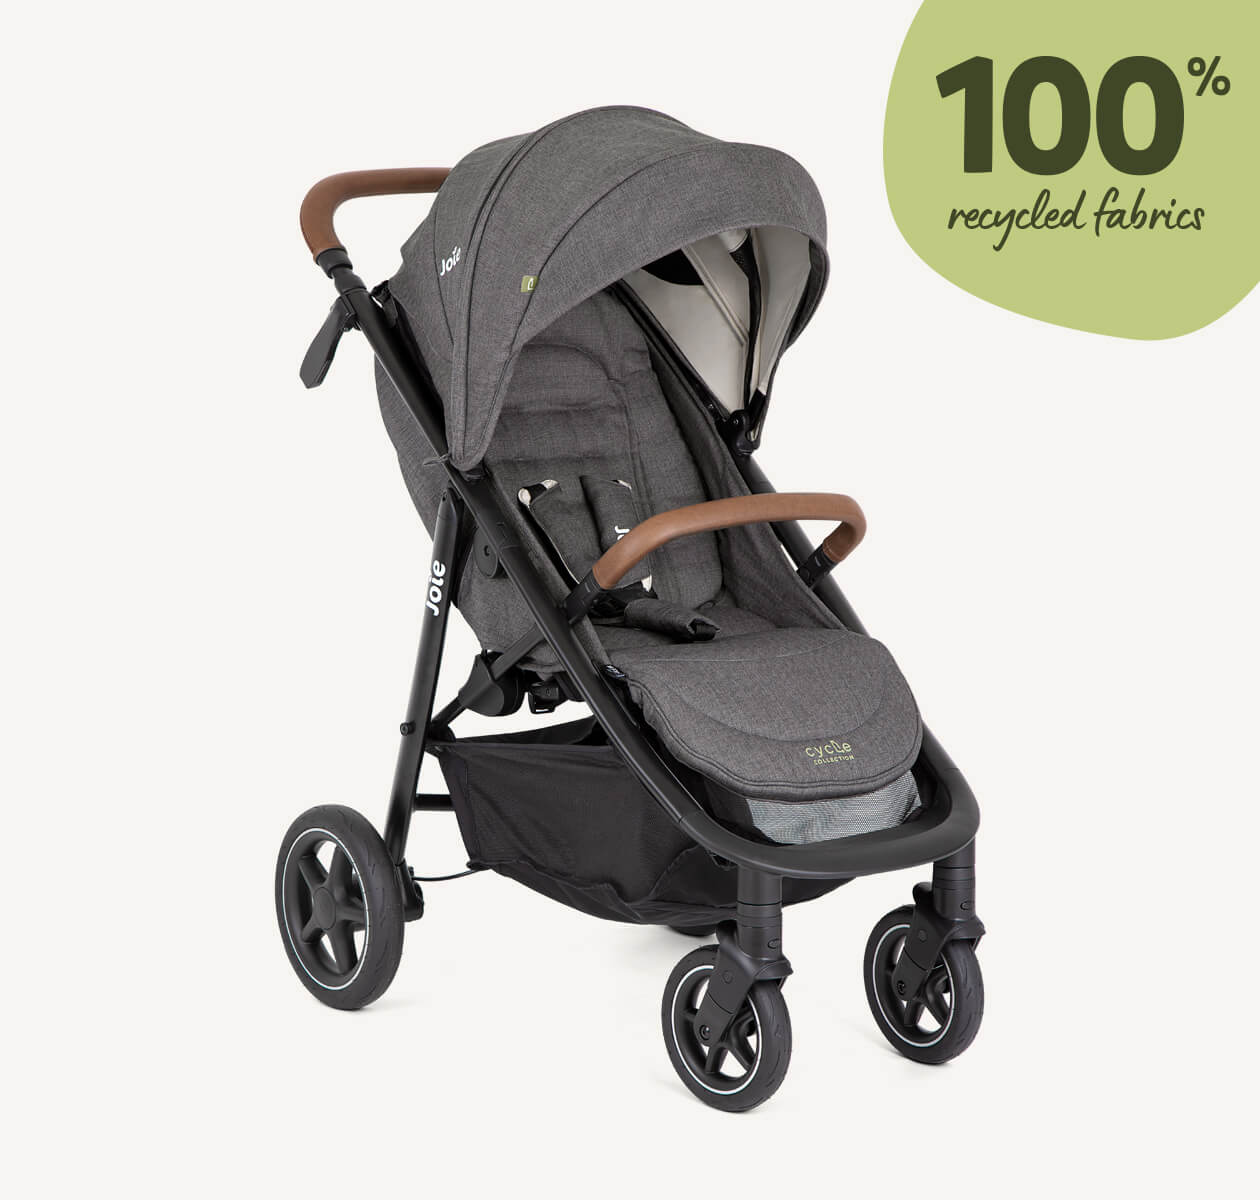 Gray Joie Mytrax Pro stroller facing to the right at a 45 degree angle.